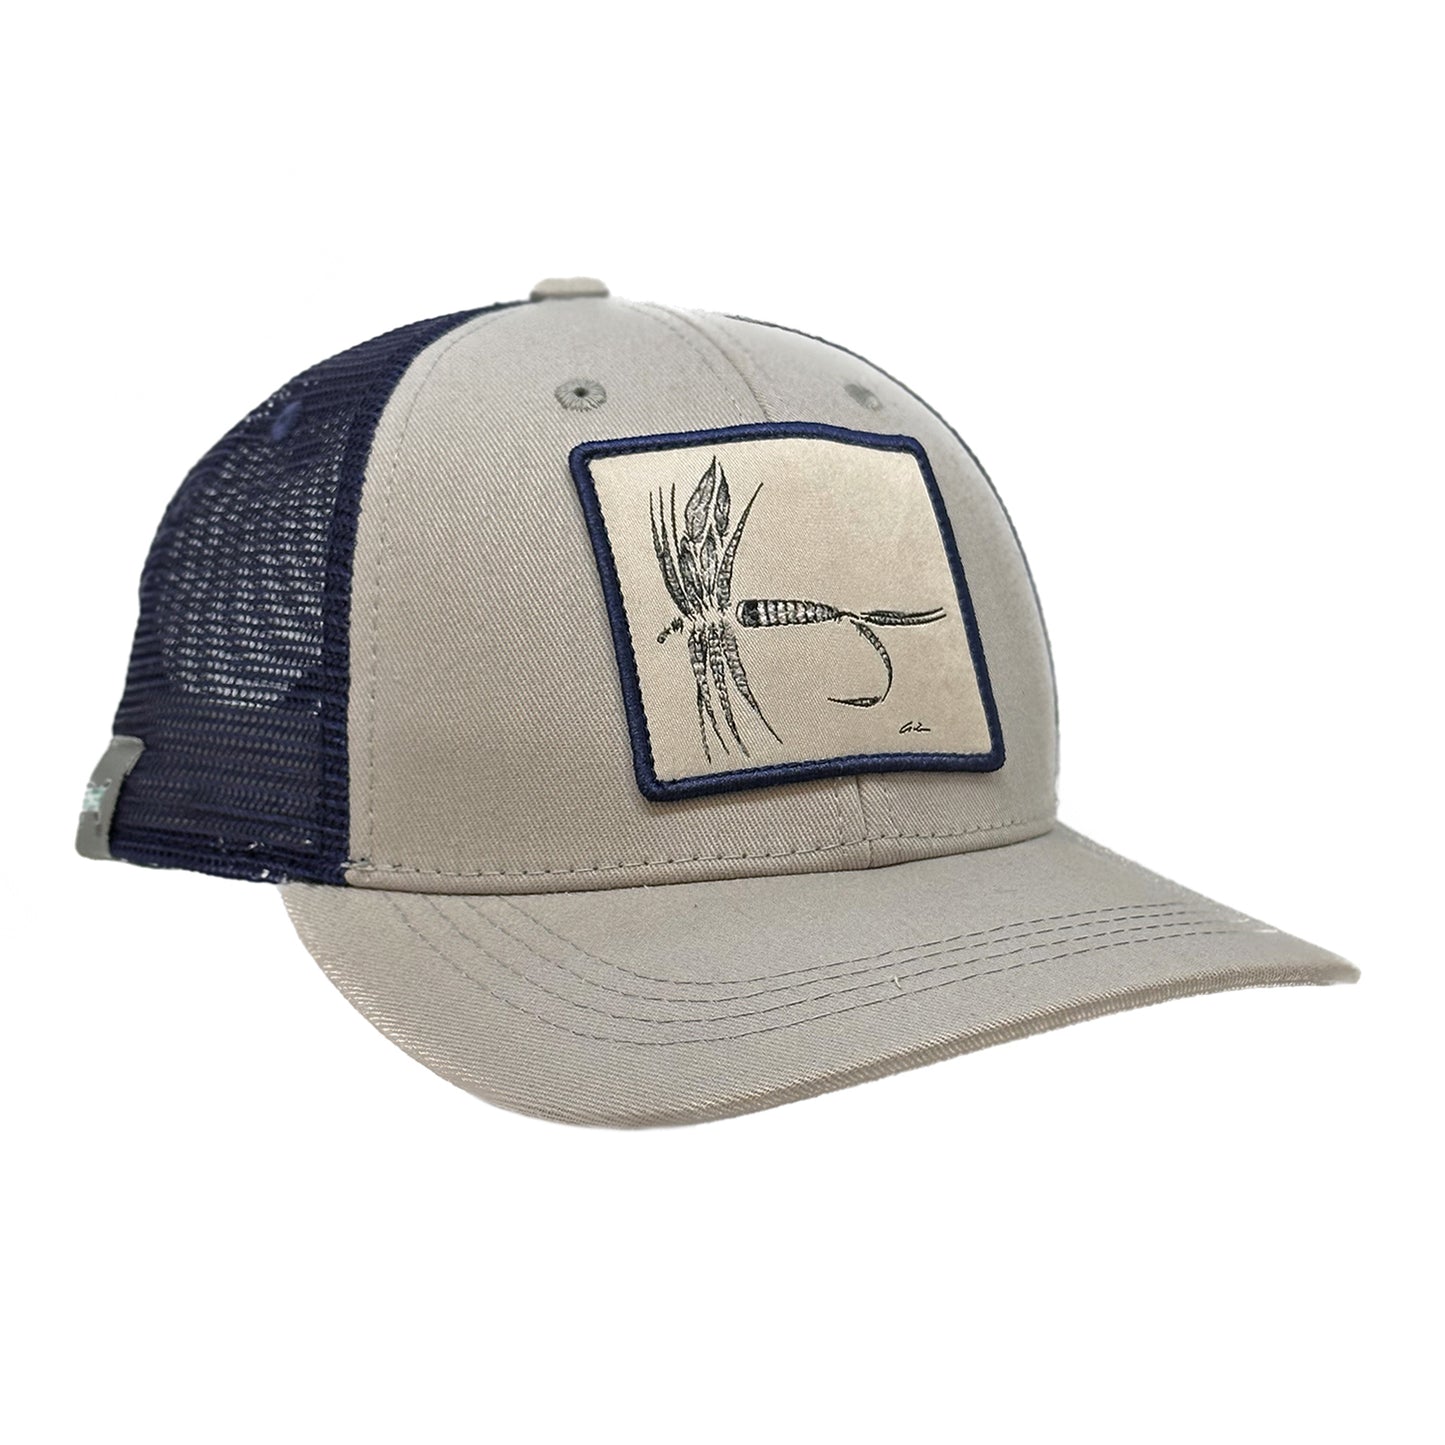 A light gray hat with navy mesh back with a patch of a dry fly made up of feathers